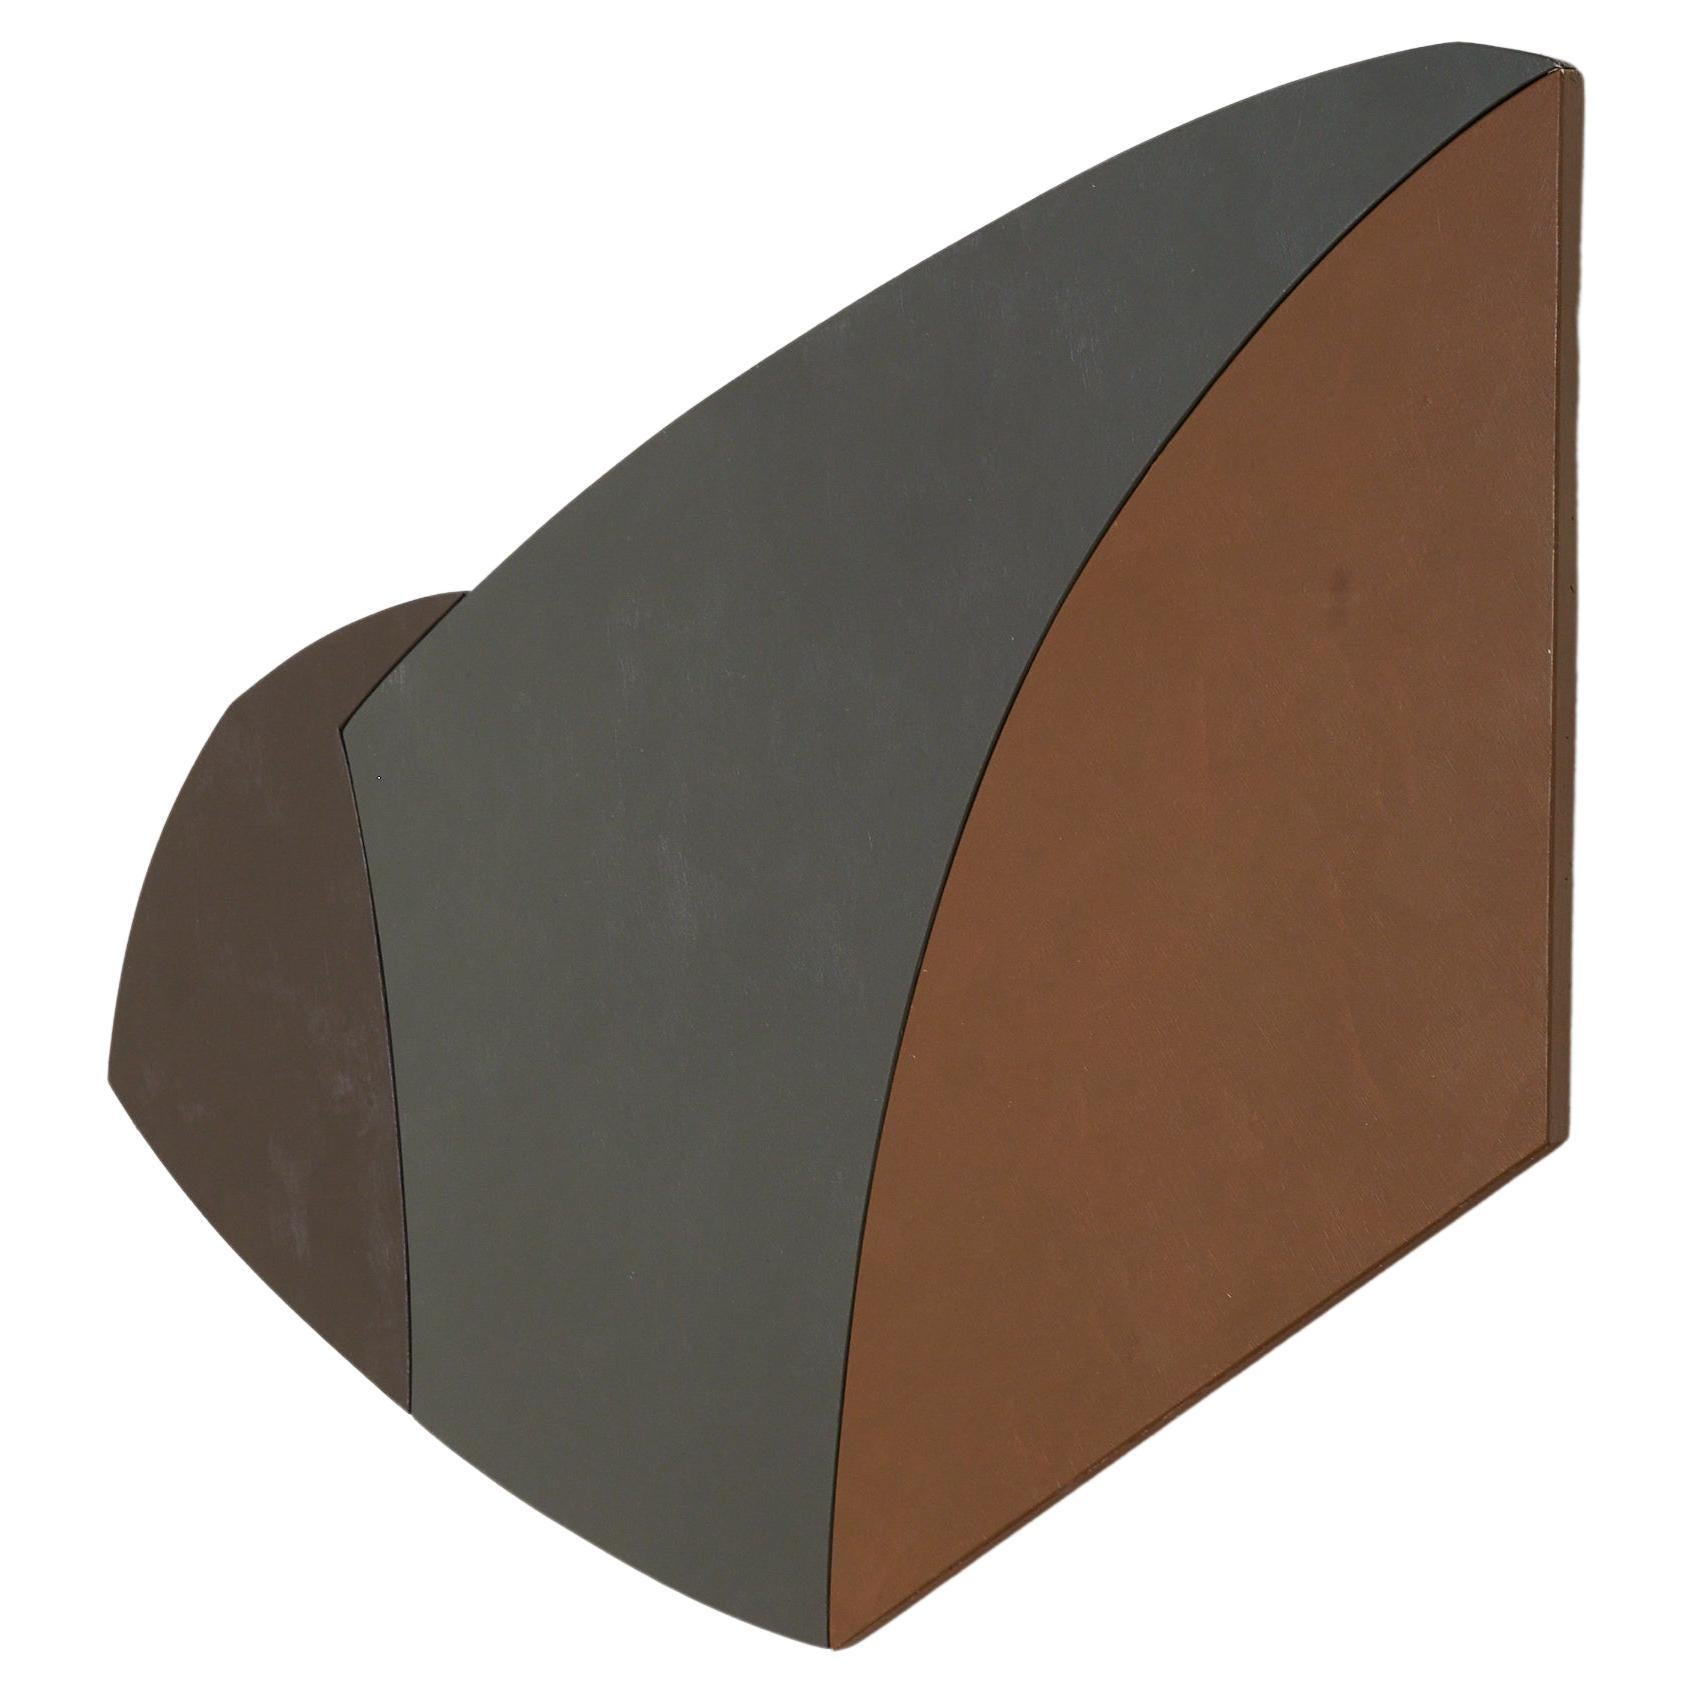 Kevin O'Toole "Interlock" Wooden Wall Sculpture For Sale